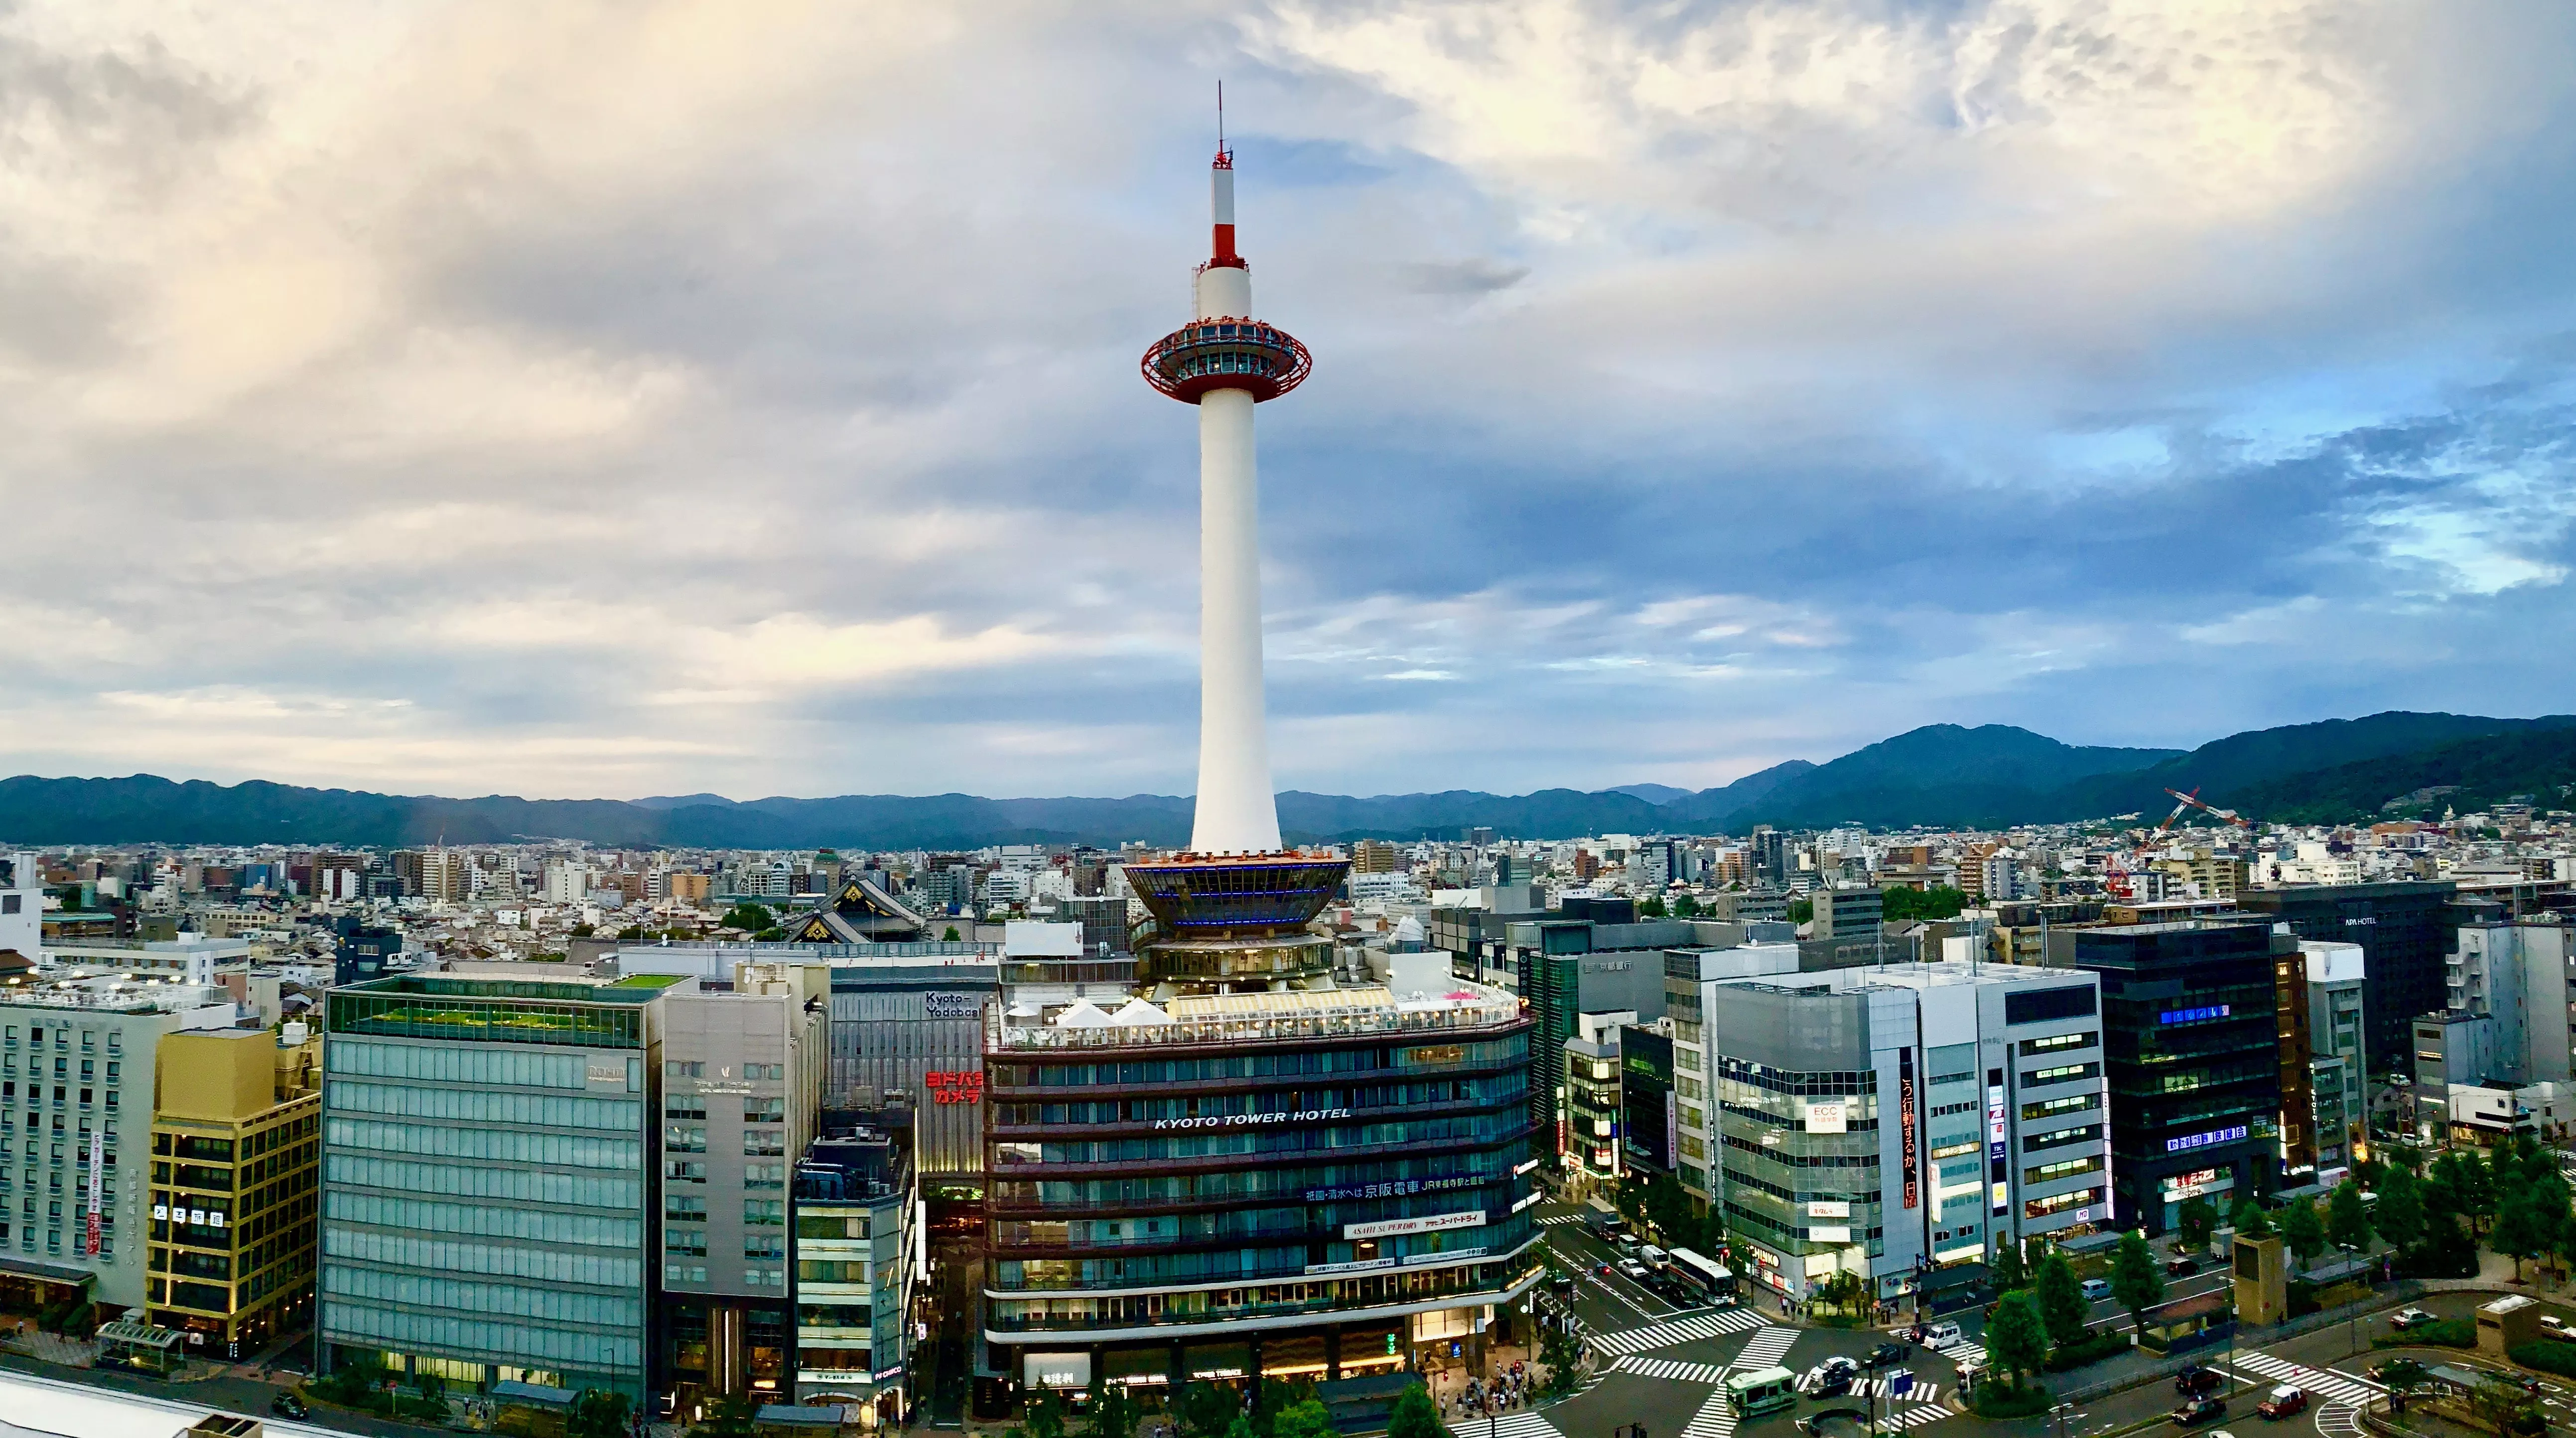 Kyoto Tower in Japan, East Asia  - Rated 3.5